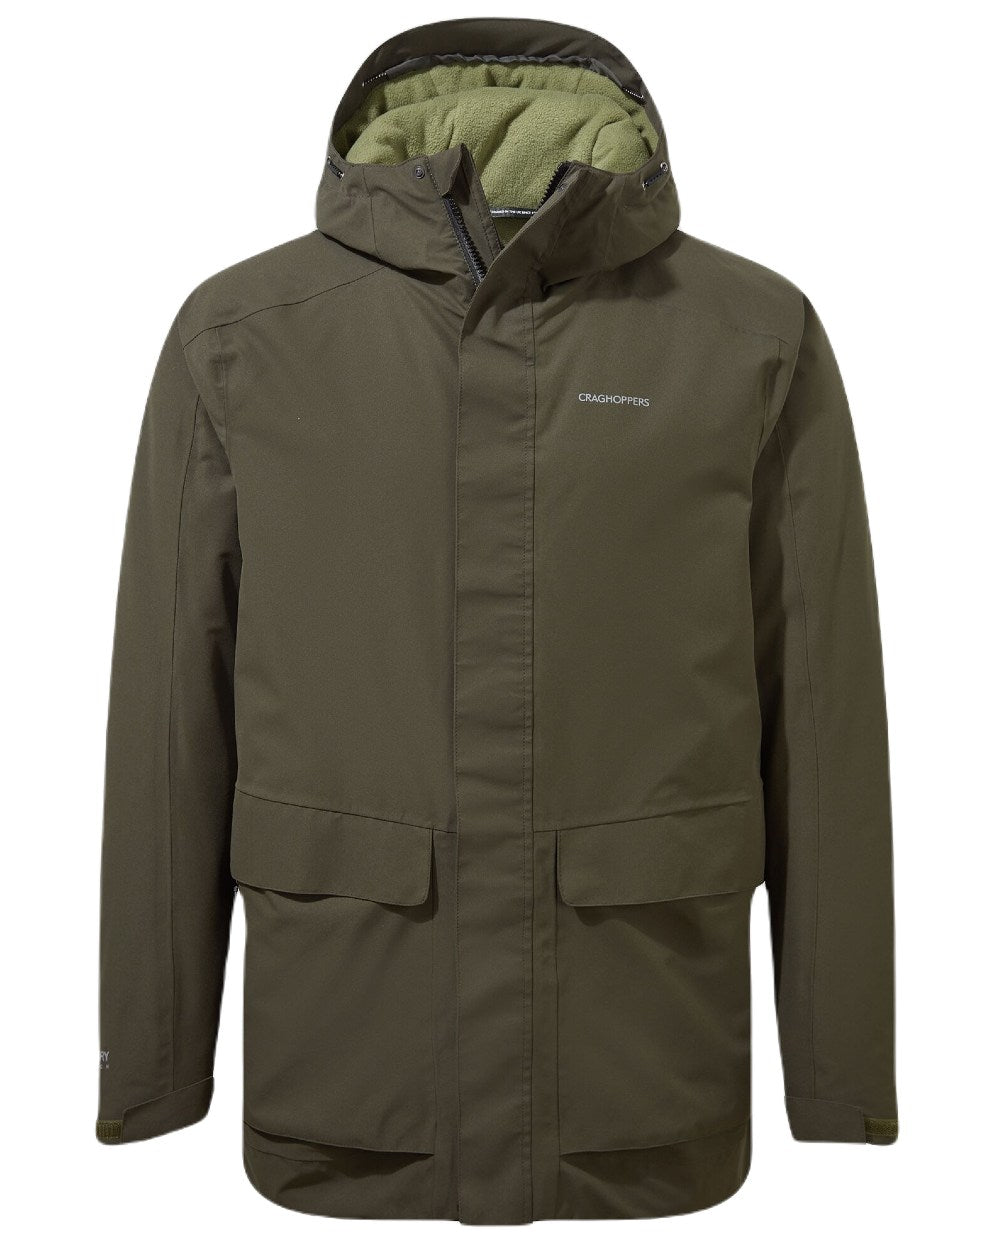 Woodland Green Coloured Craghoppers Mens Lorton Thermic Jacket On A White Background 